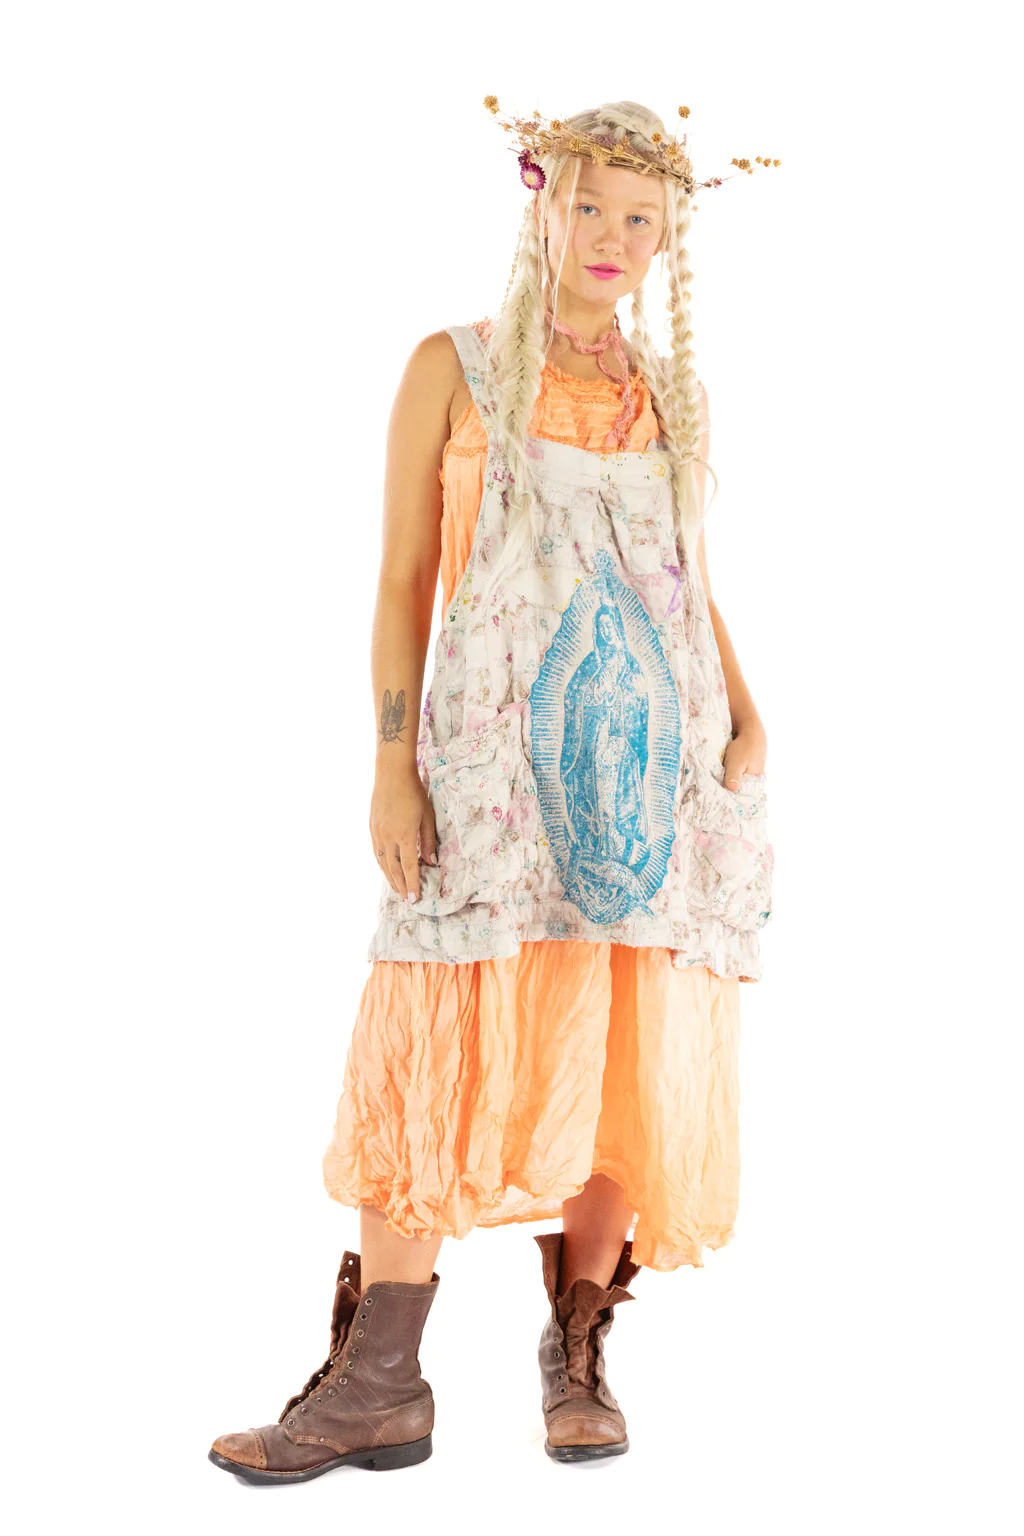 Magnolia Pearl Floral Ellie Fay Apron in Moonlight Apron 016